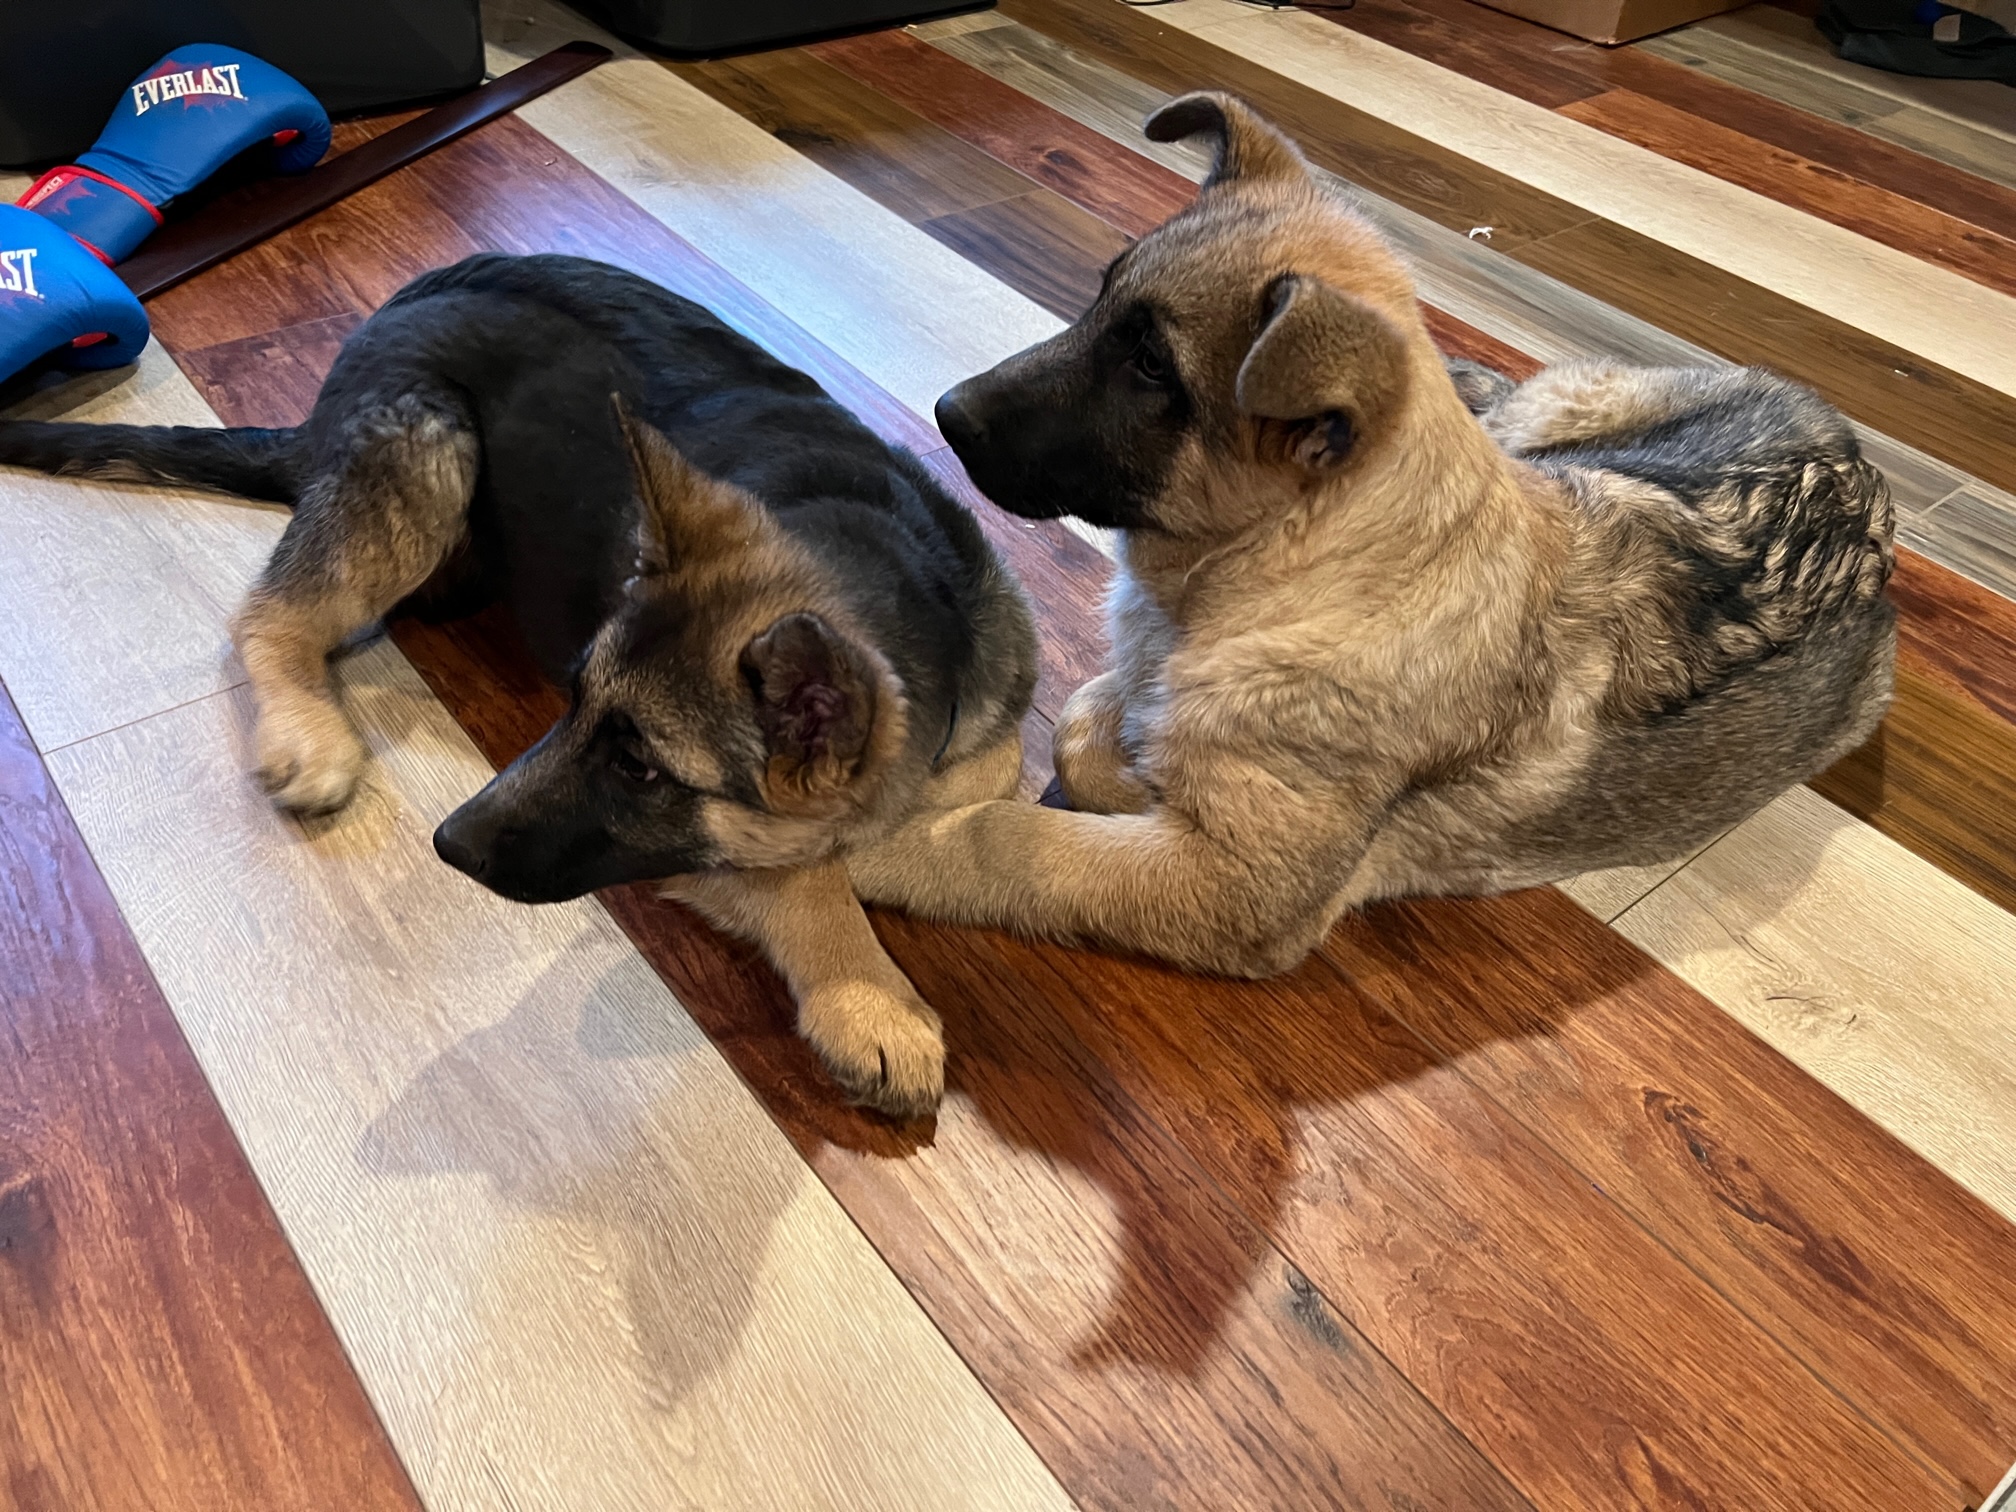 Purebred German Shepherd Puppies Only  Purebred German Shepherd Puppies Only 2 left 1 Male & 1 Female Striking black sable in color. No papers. $500 208-304-8107 Sandpoint